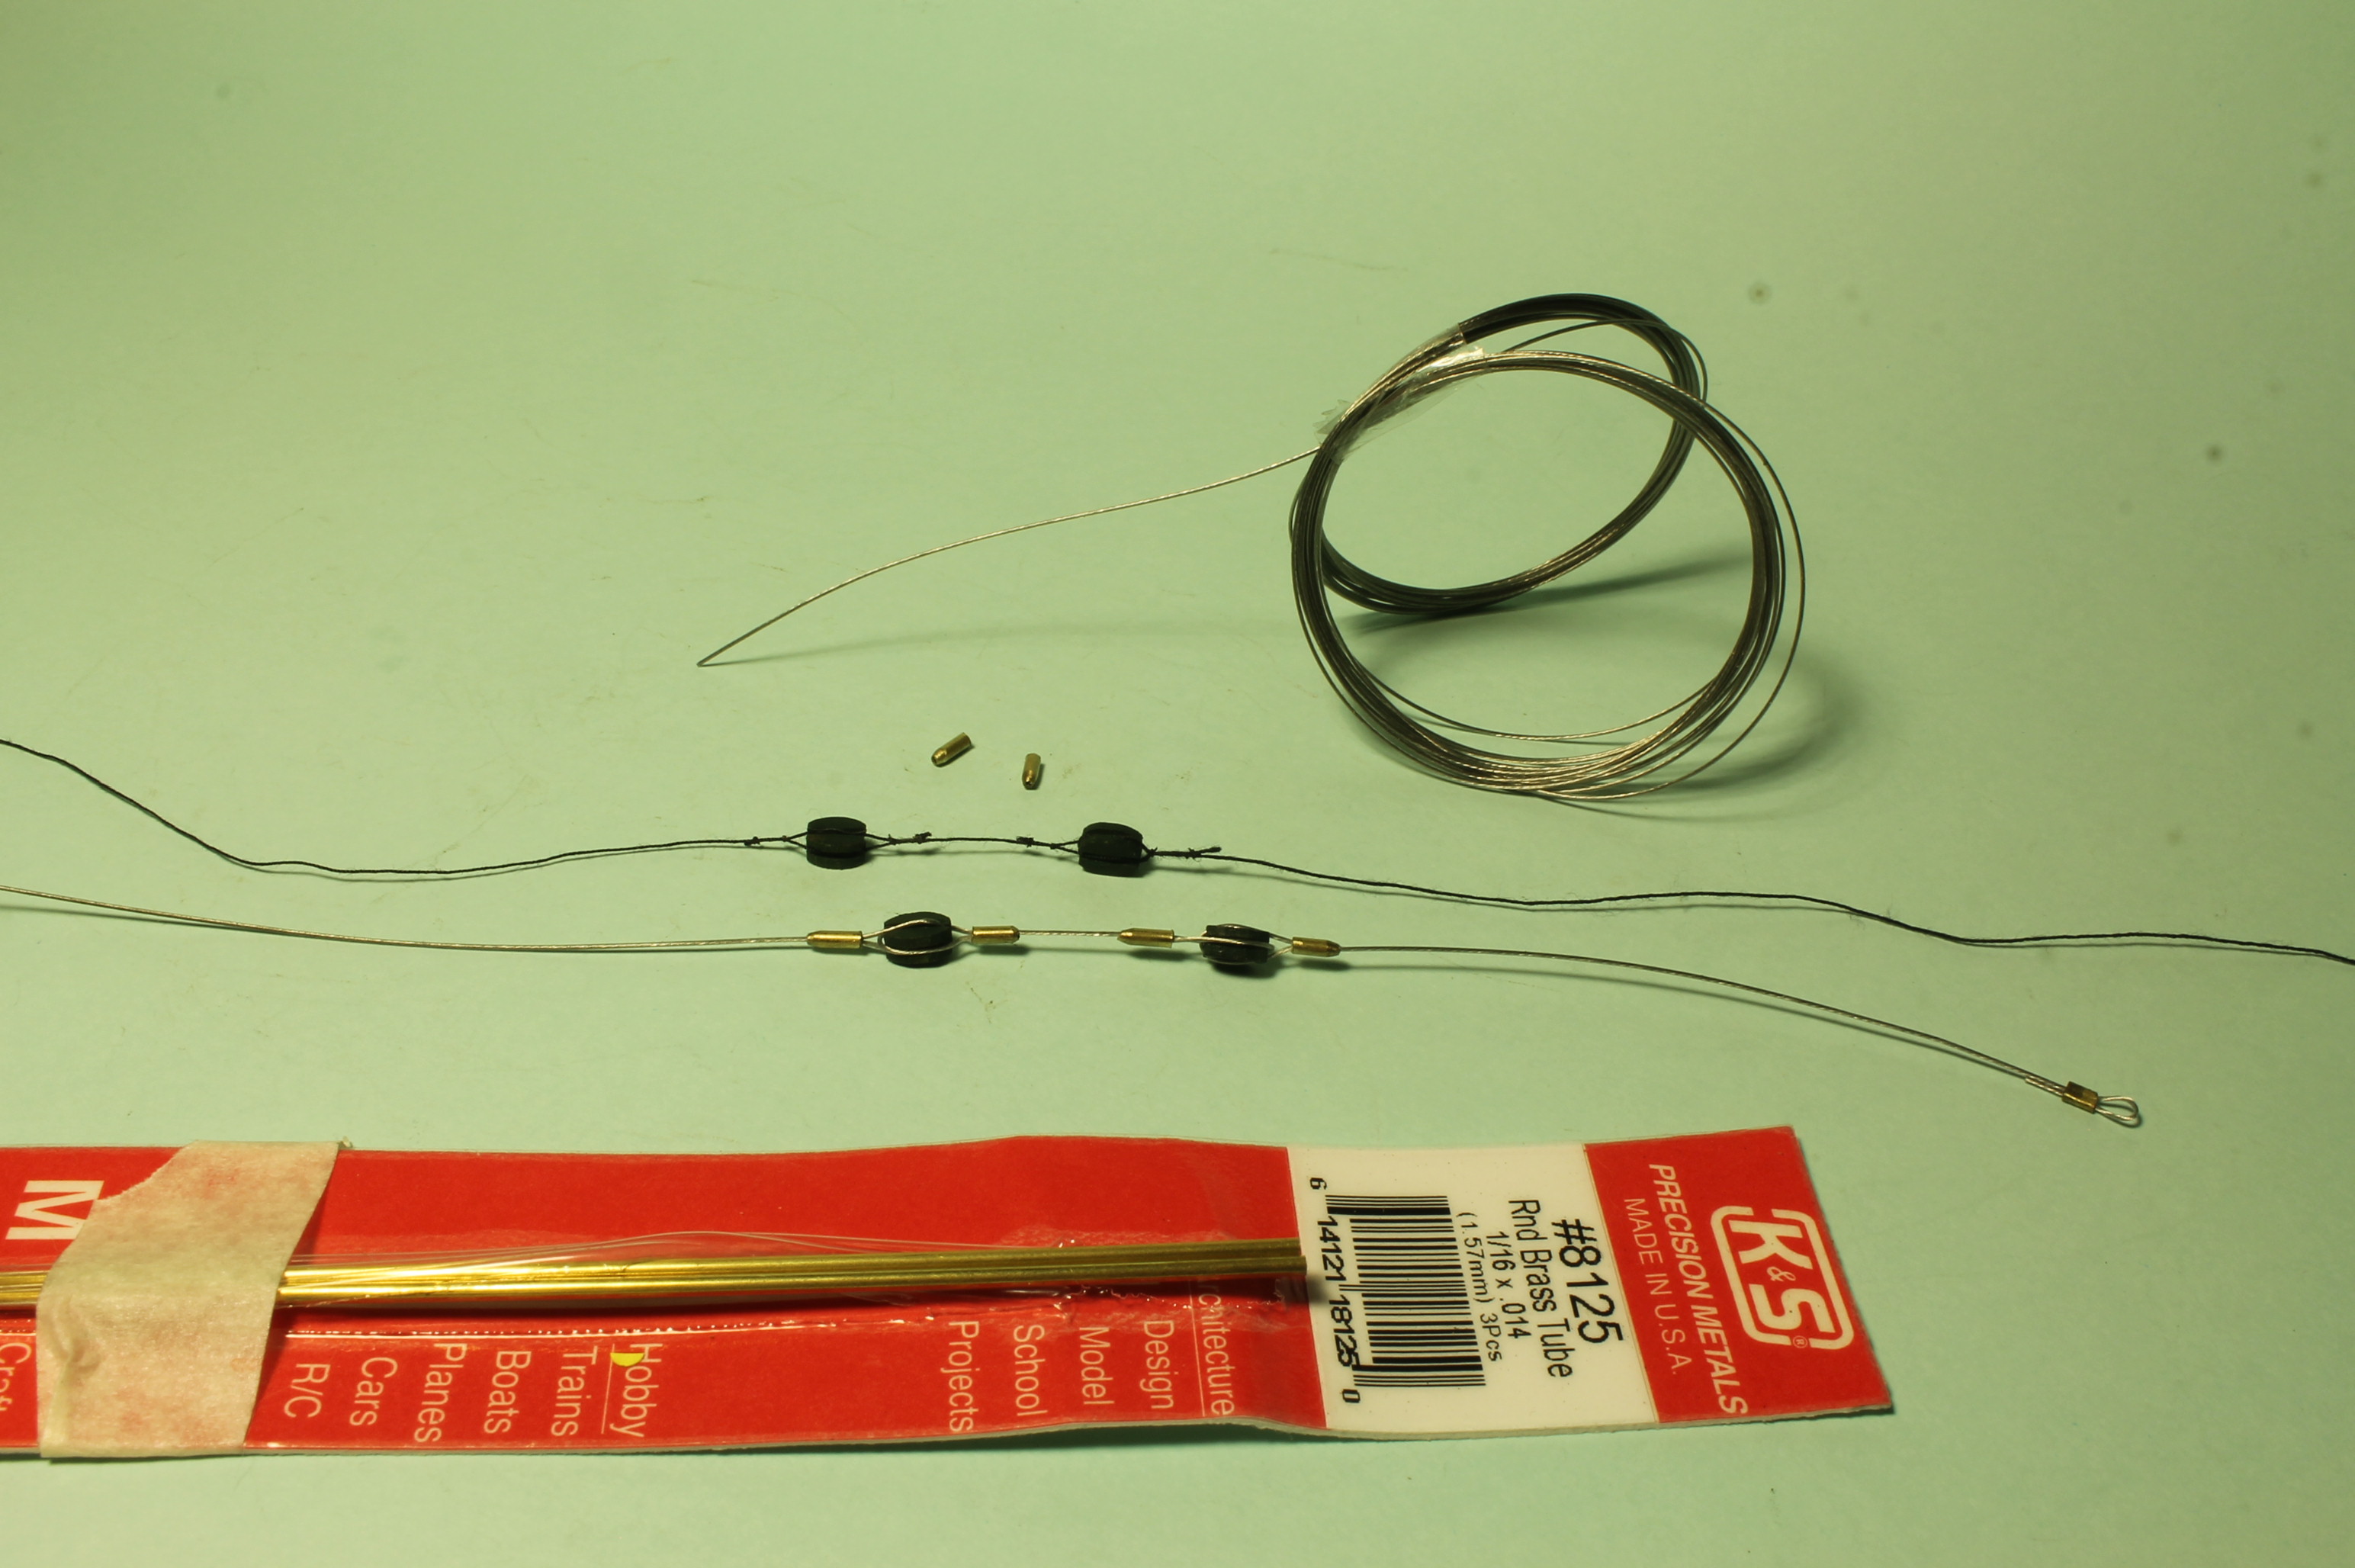 Finding a better option for the antenna wires